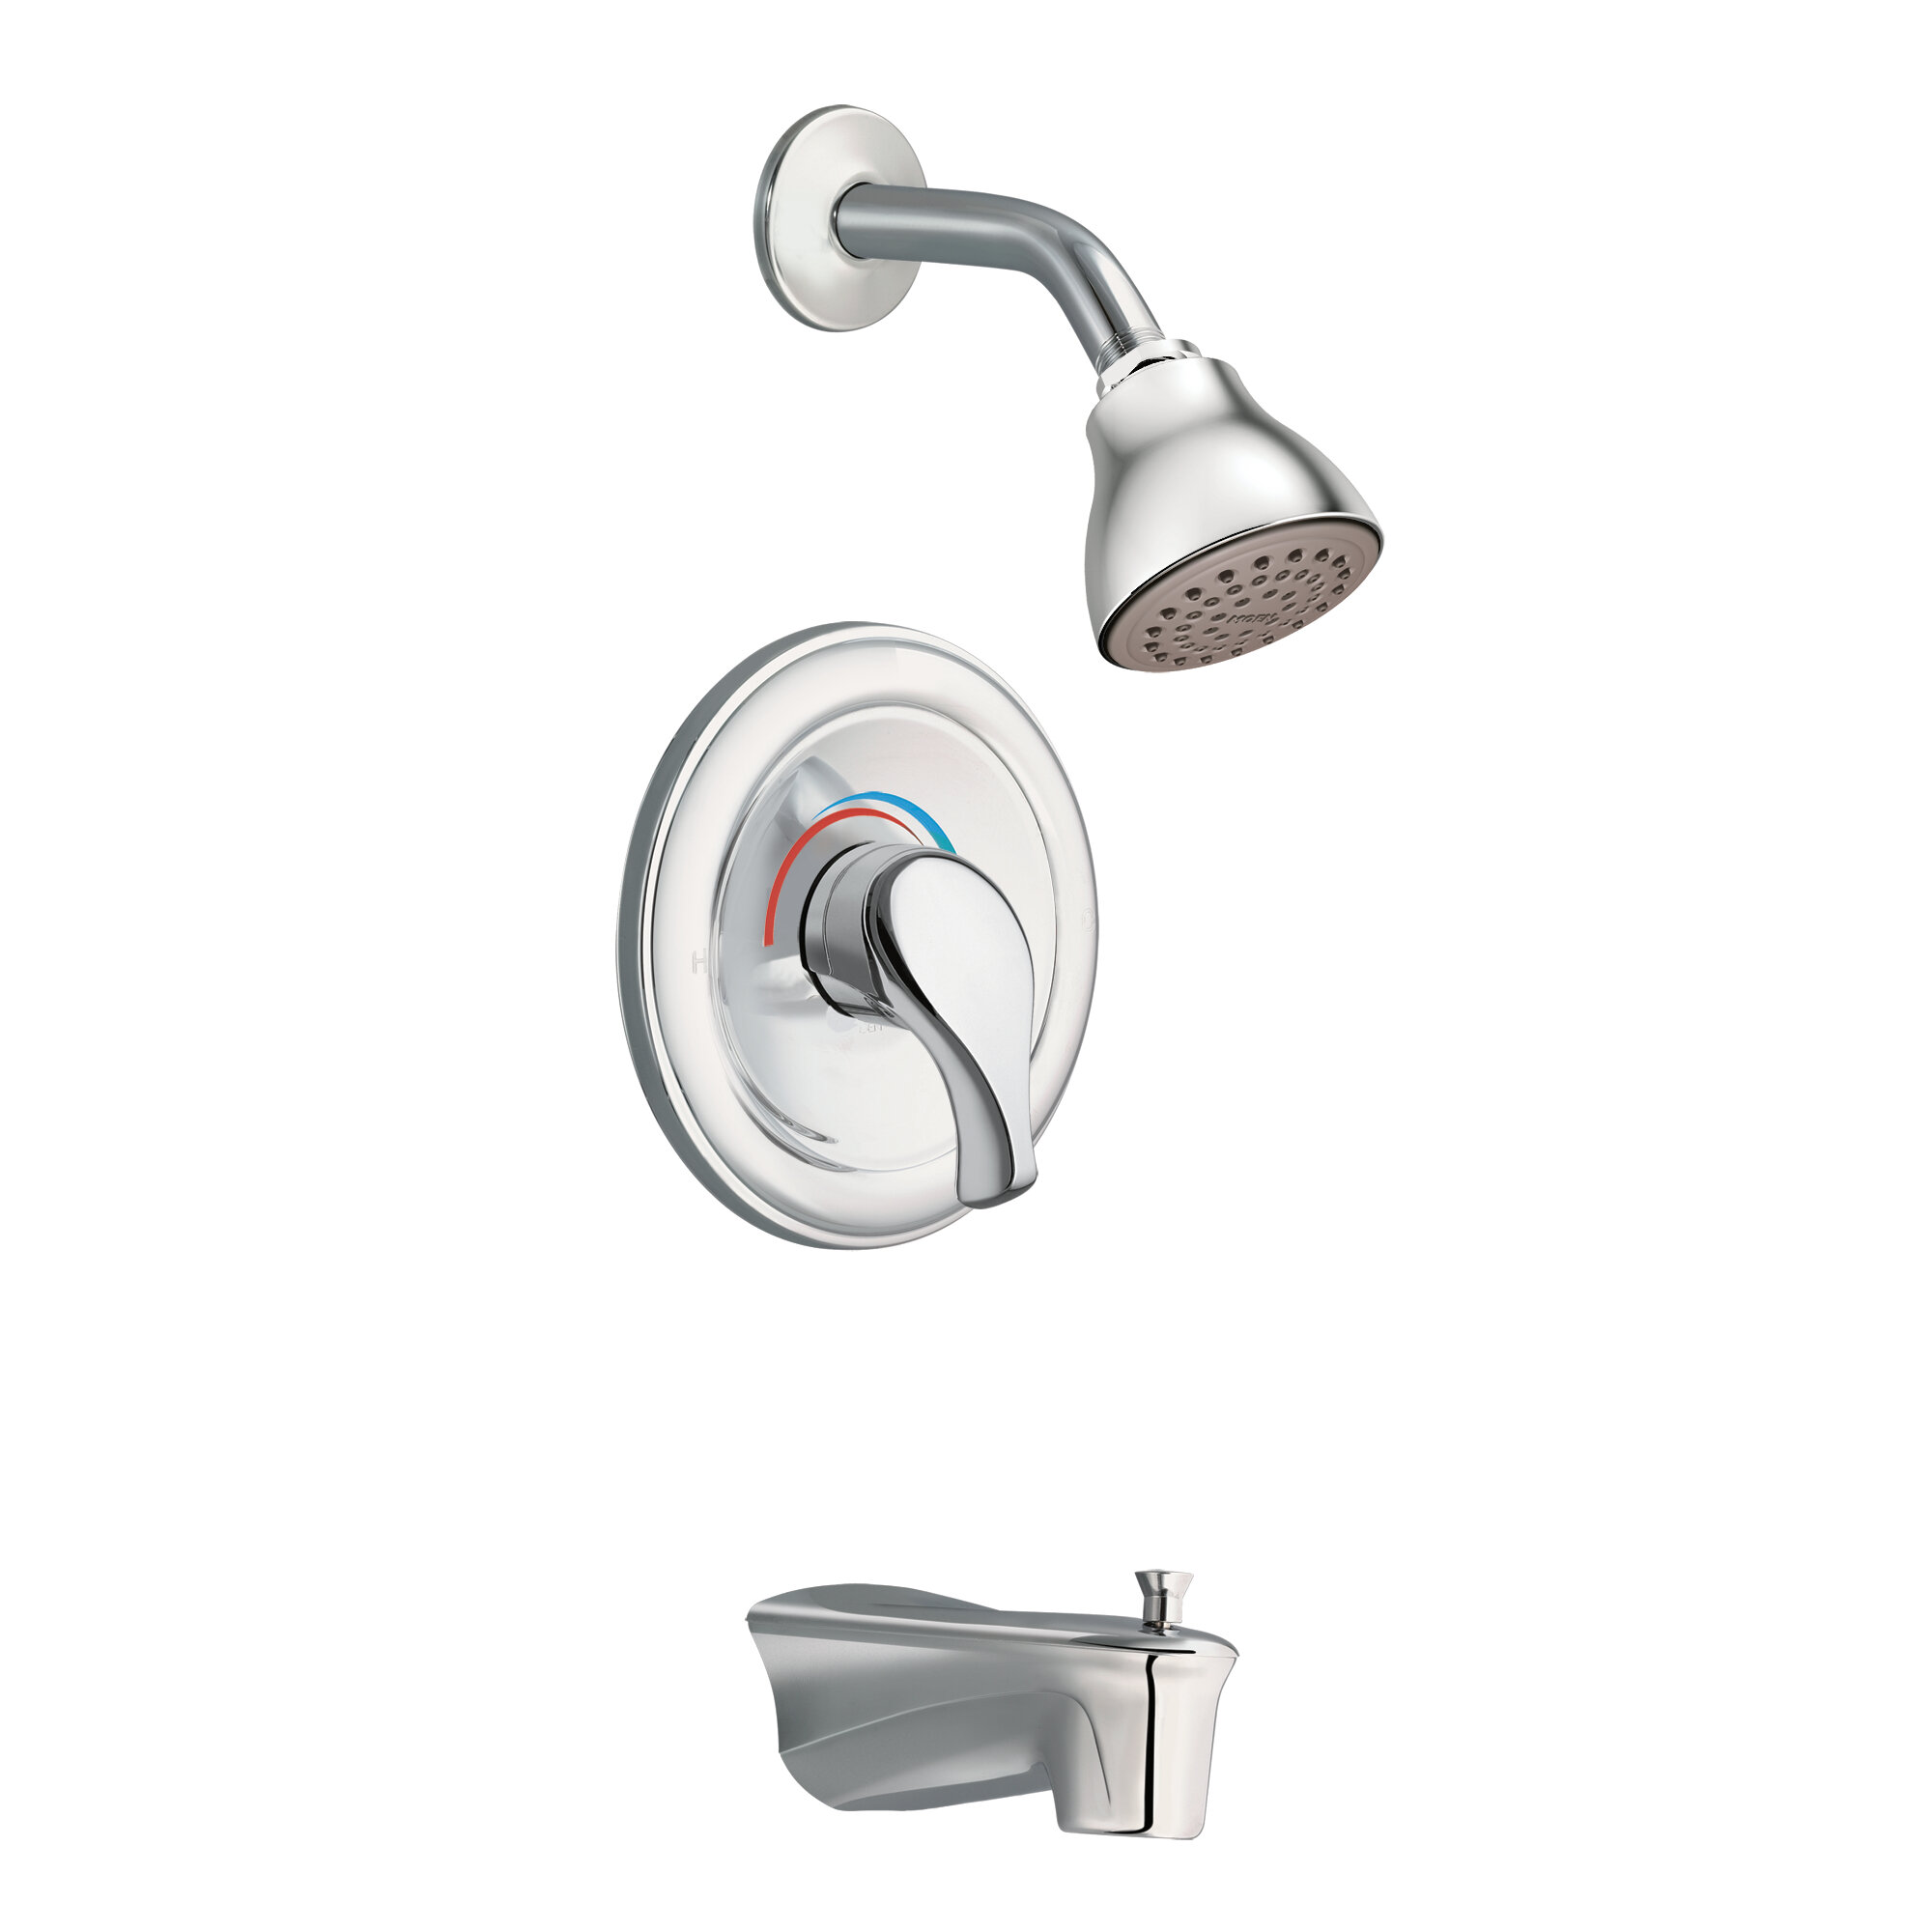 Tl172 Moen Legend Single Handle Tub And Shower Faucet Trim With